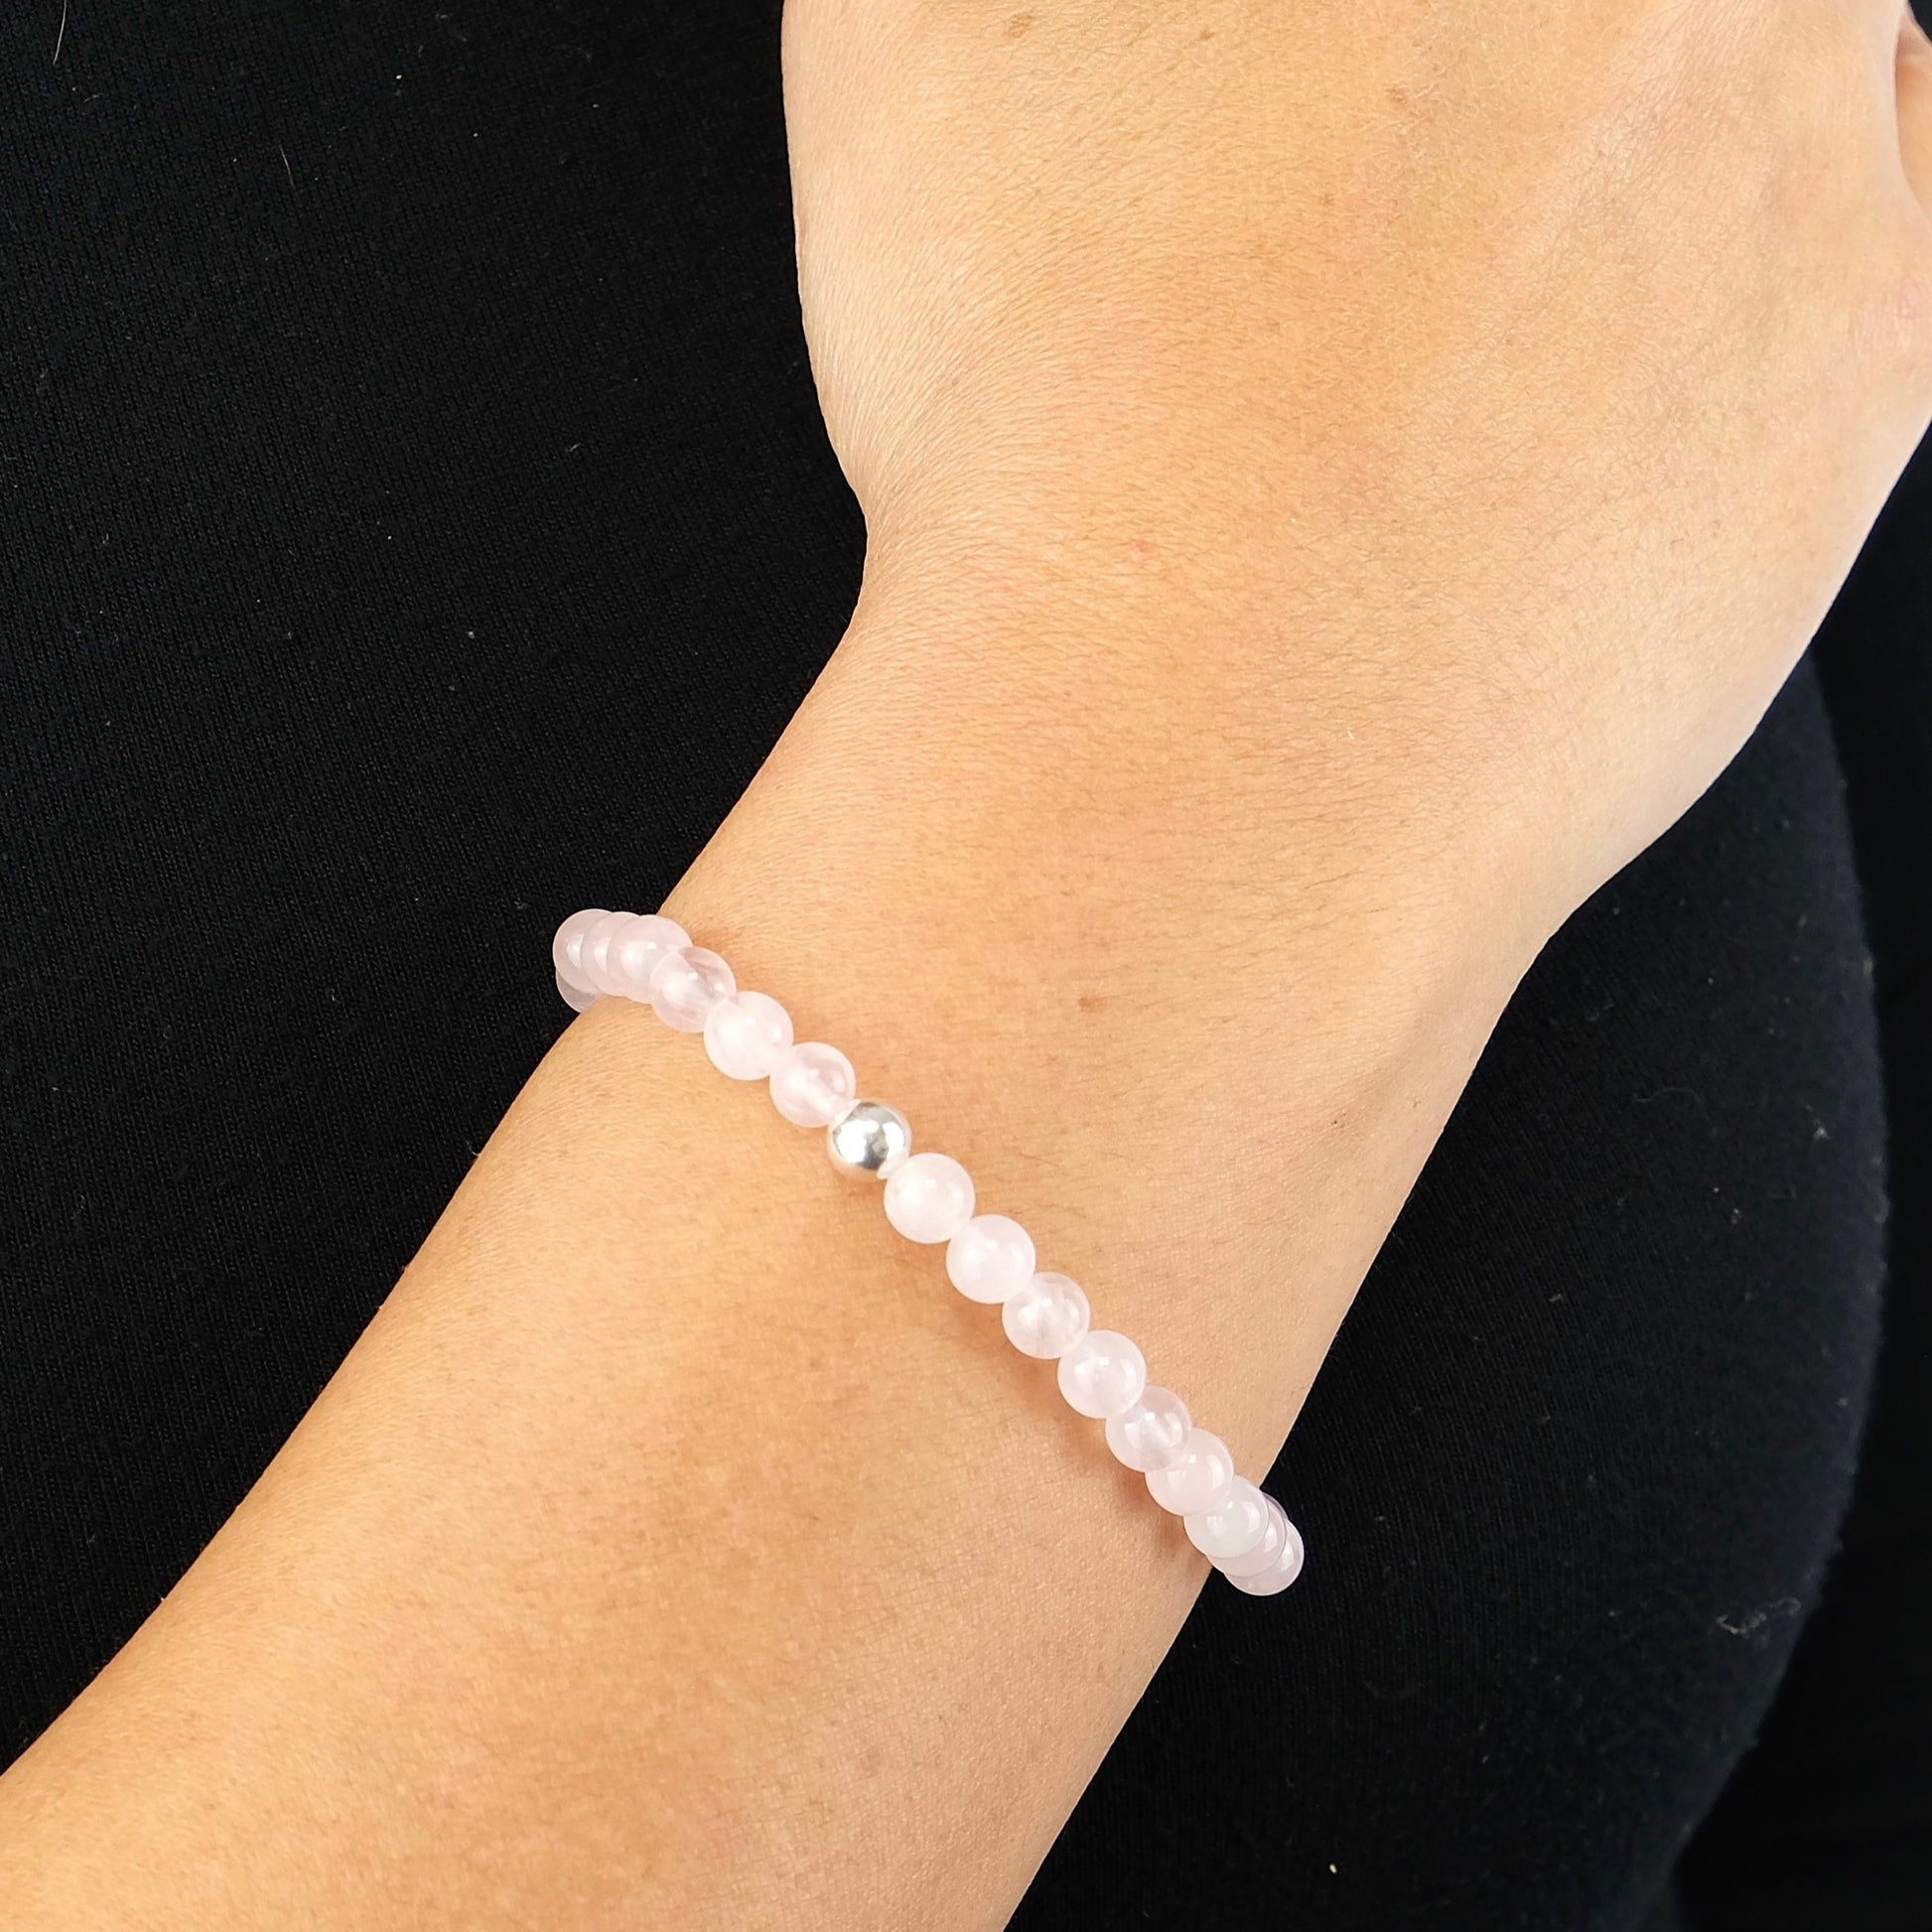 Rose Quartz gemstone bracelet in 6mm beads with 925 sterling silver accent worn on the model's wrist.